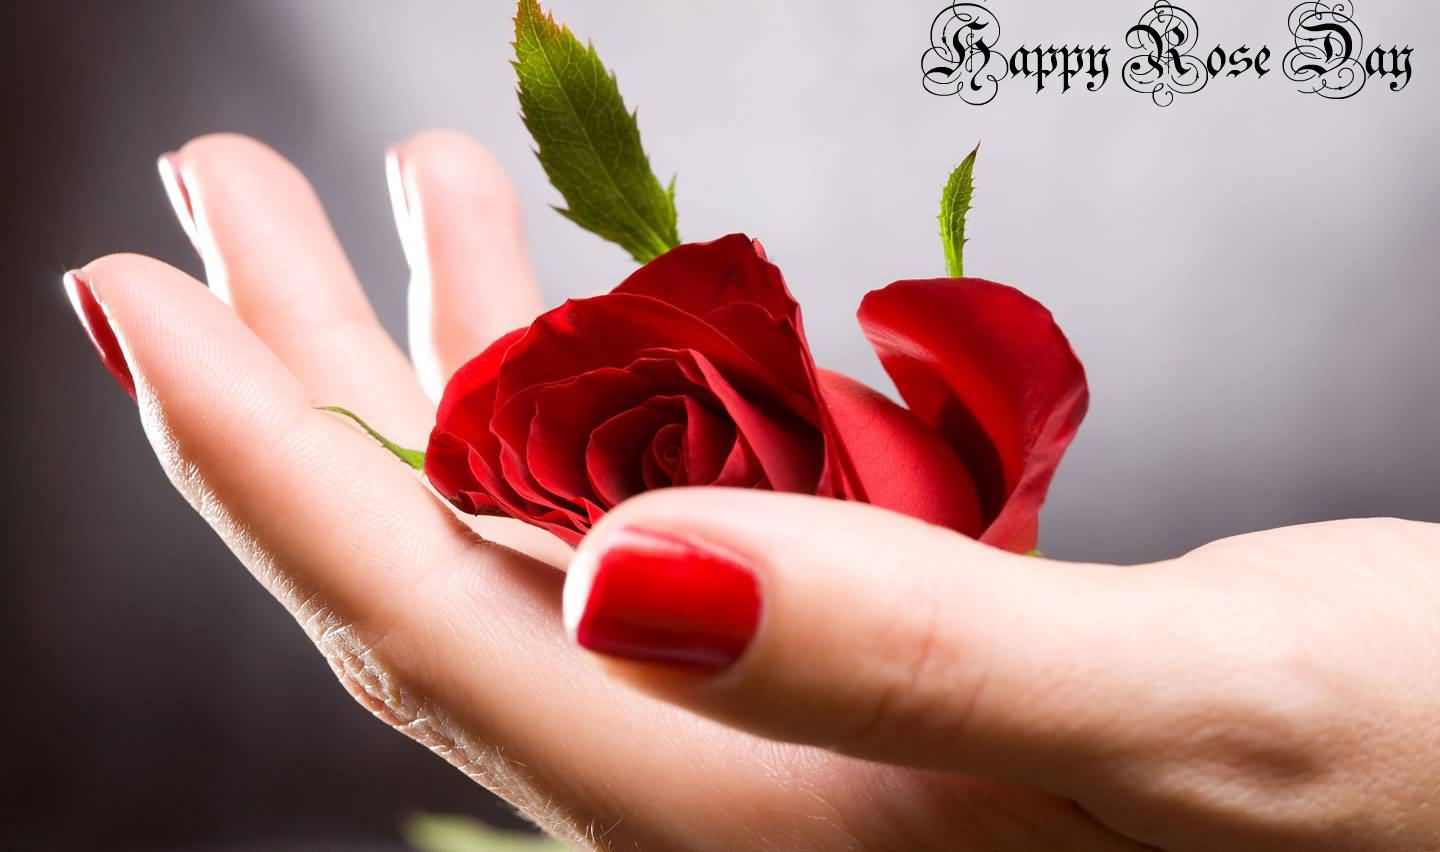 Happy Rose Day Rose Bud In Hand